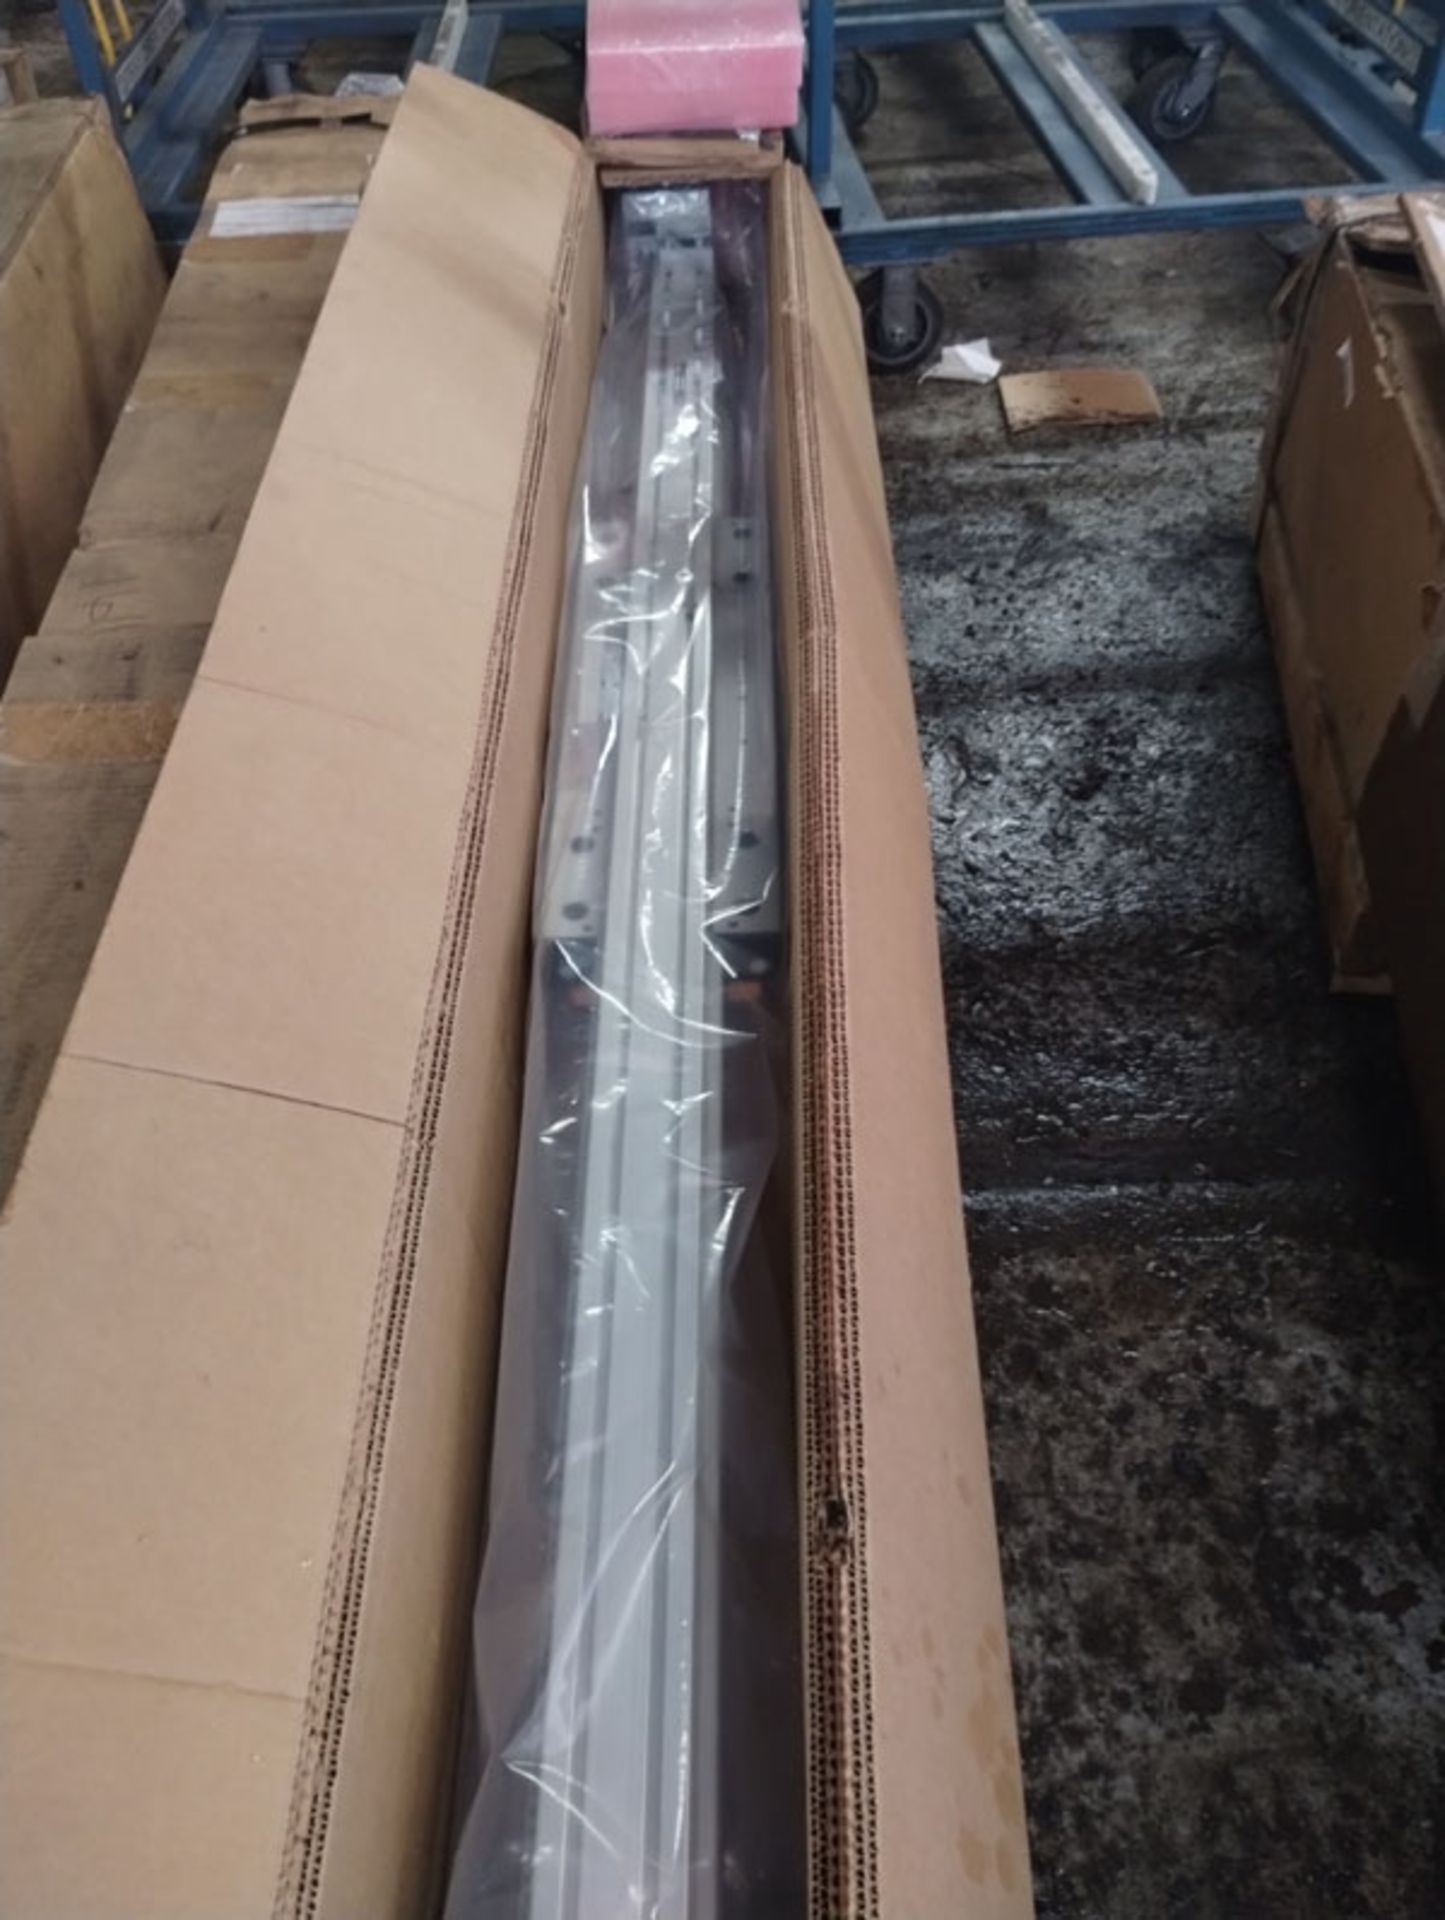 147" LINEAR ACTUATOR PART# 11237A01 --- Lot located at second location: 6800 Union ave. , Cleveland - Image 4 of 7